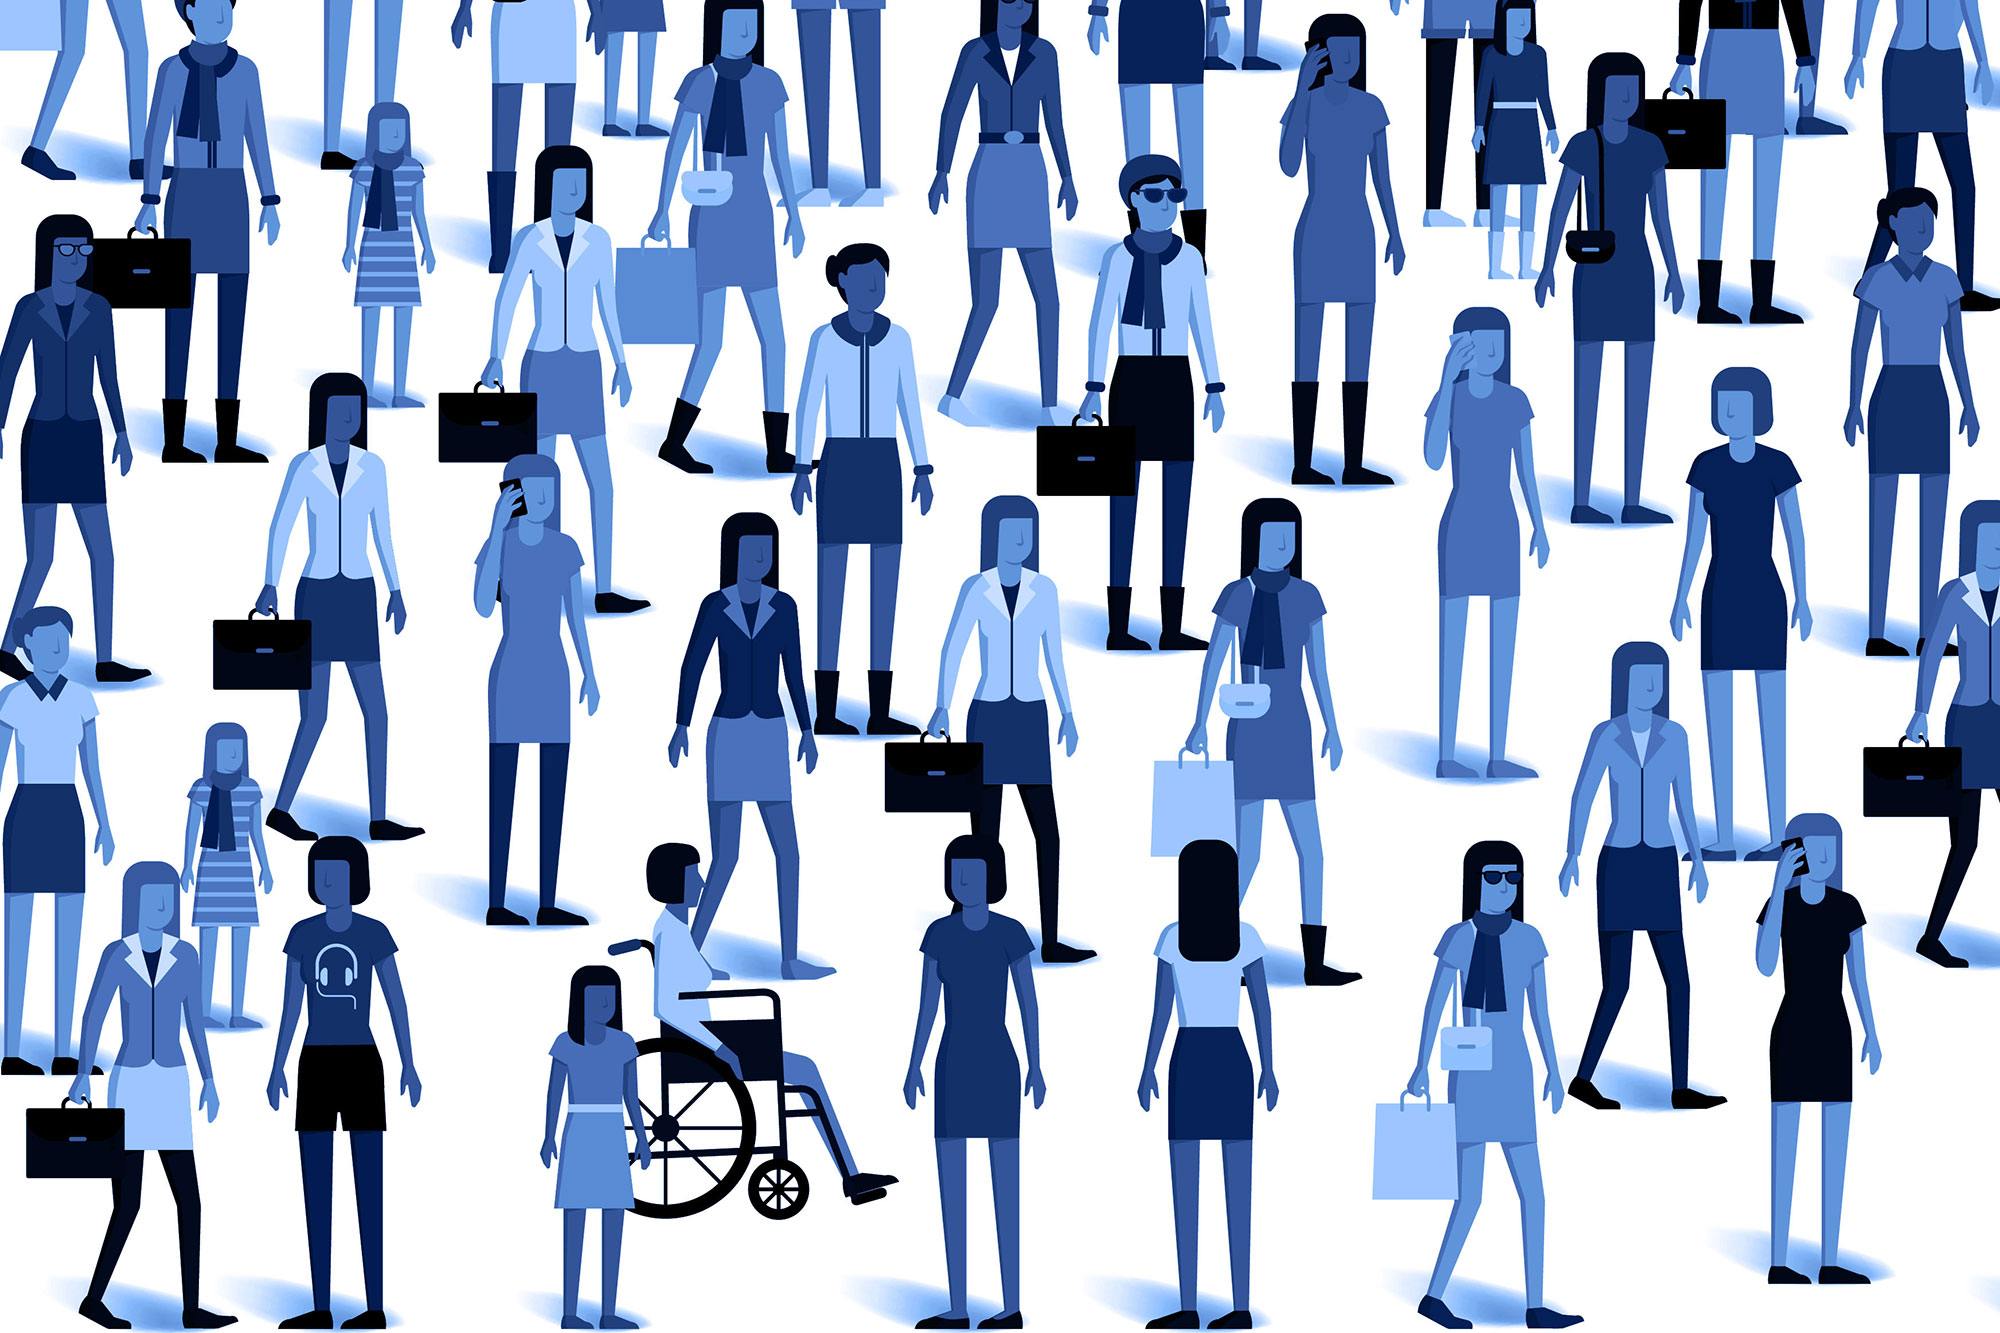 Illustration of people walking carrying briefcases, talking on cell phones, and in wheelchairs